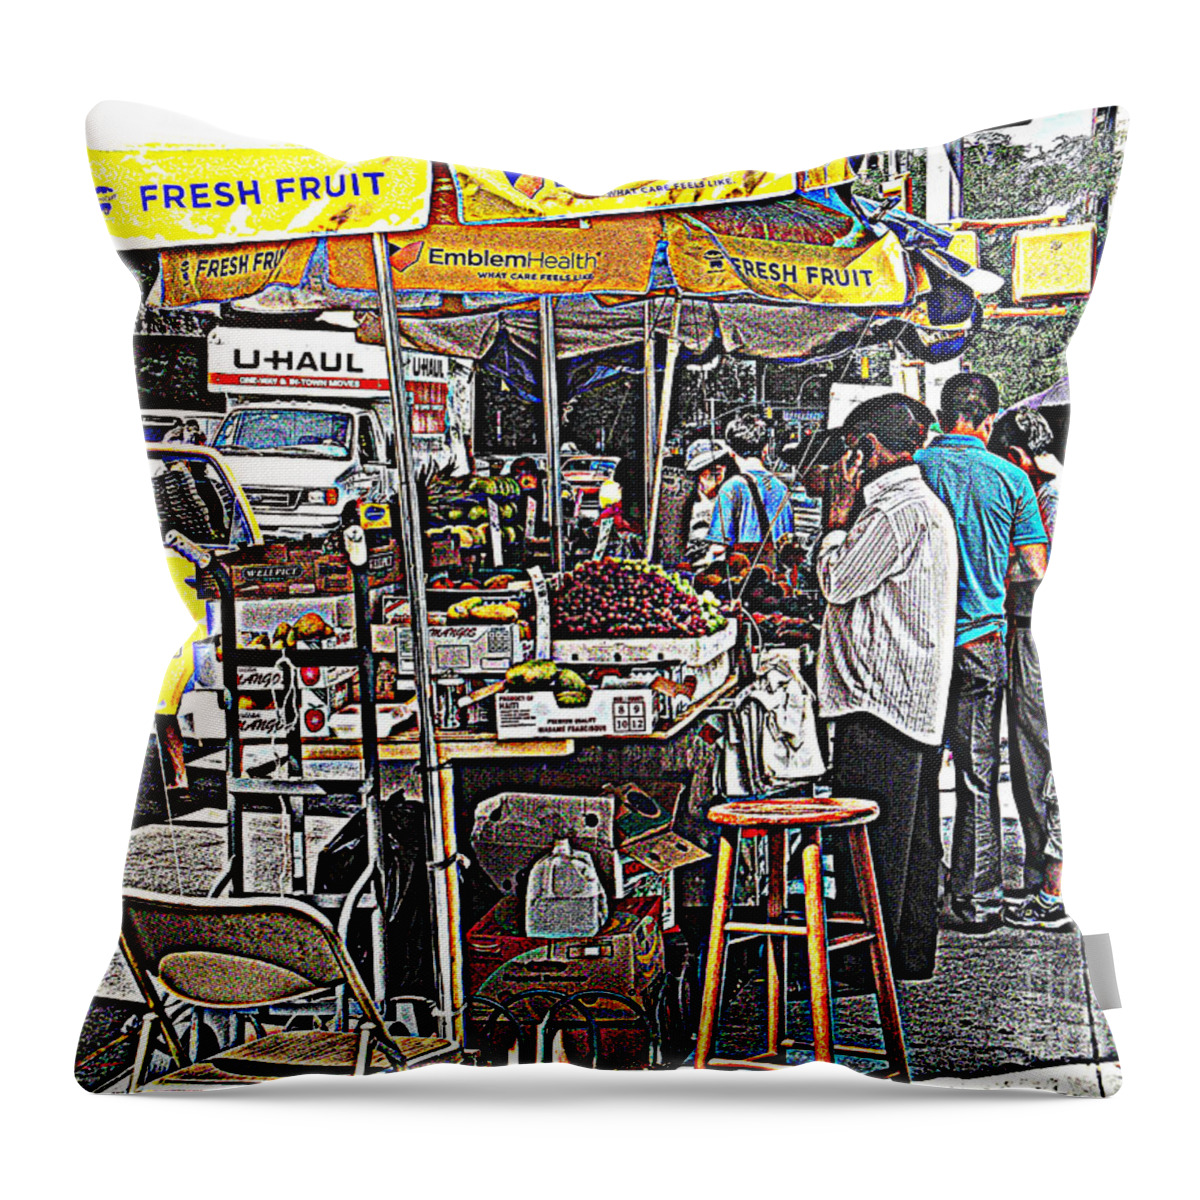 Fruitstand Throw Pillow featuring the photograph Fresh Fruit by Miriam Danar